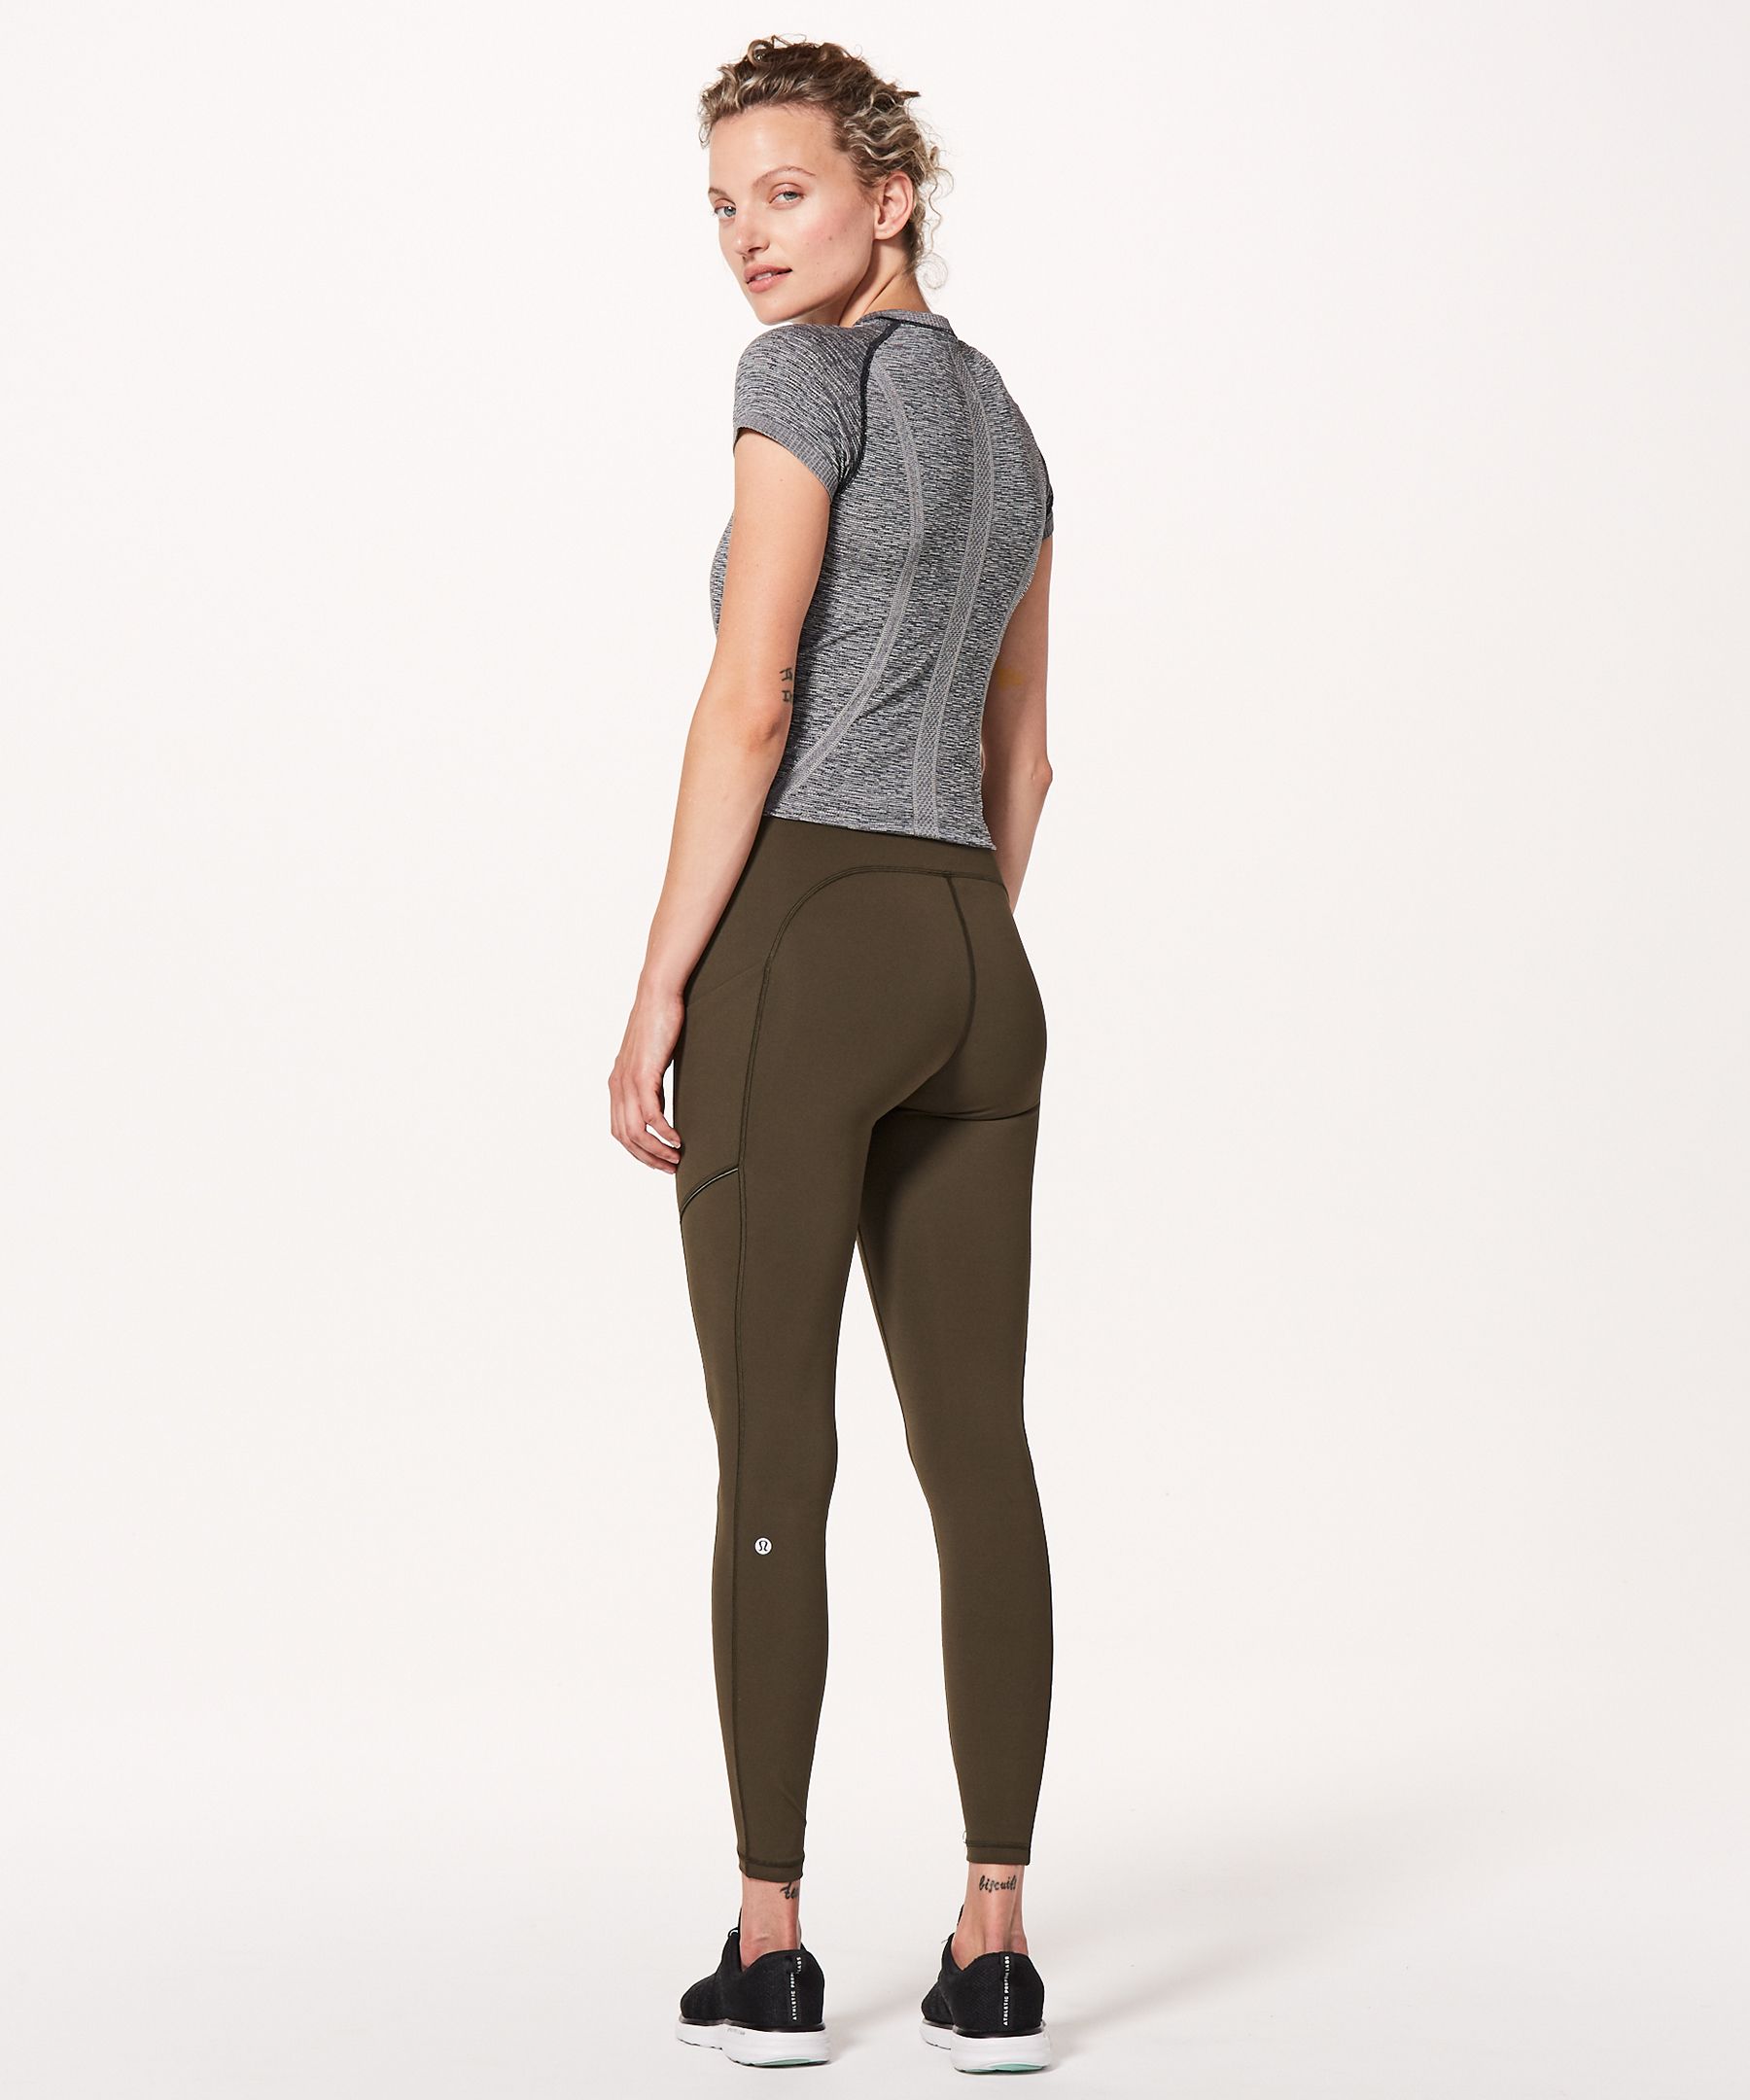 lululemon speed up tight review